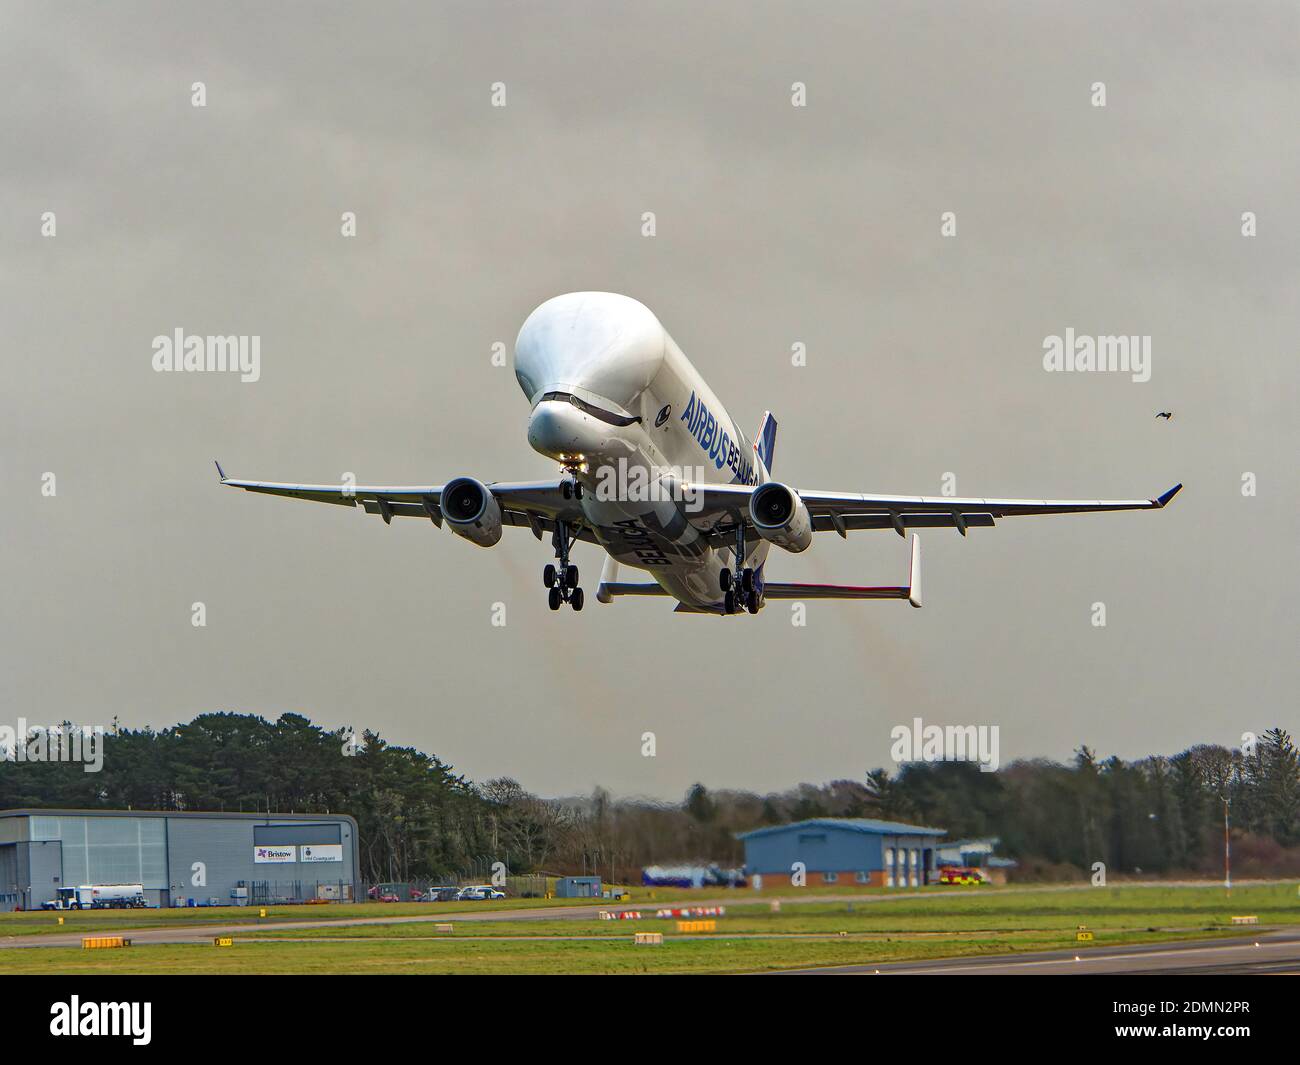 Newquay, Cornwall, UK,14th December 2020. Unusual whale shaped A700 Airbus industry aircraft visits Newquay airport for a series of flight crew traini Stock Photo